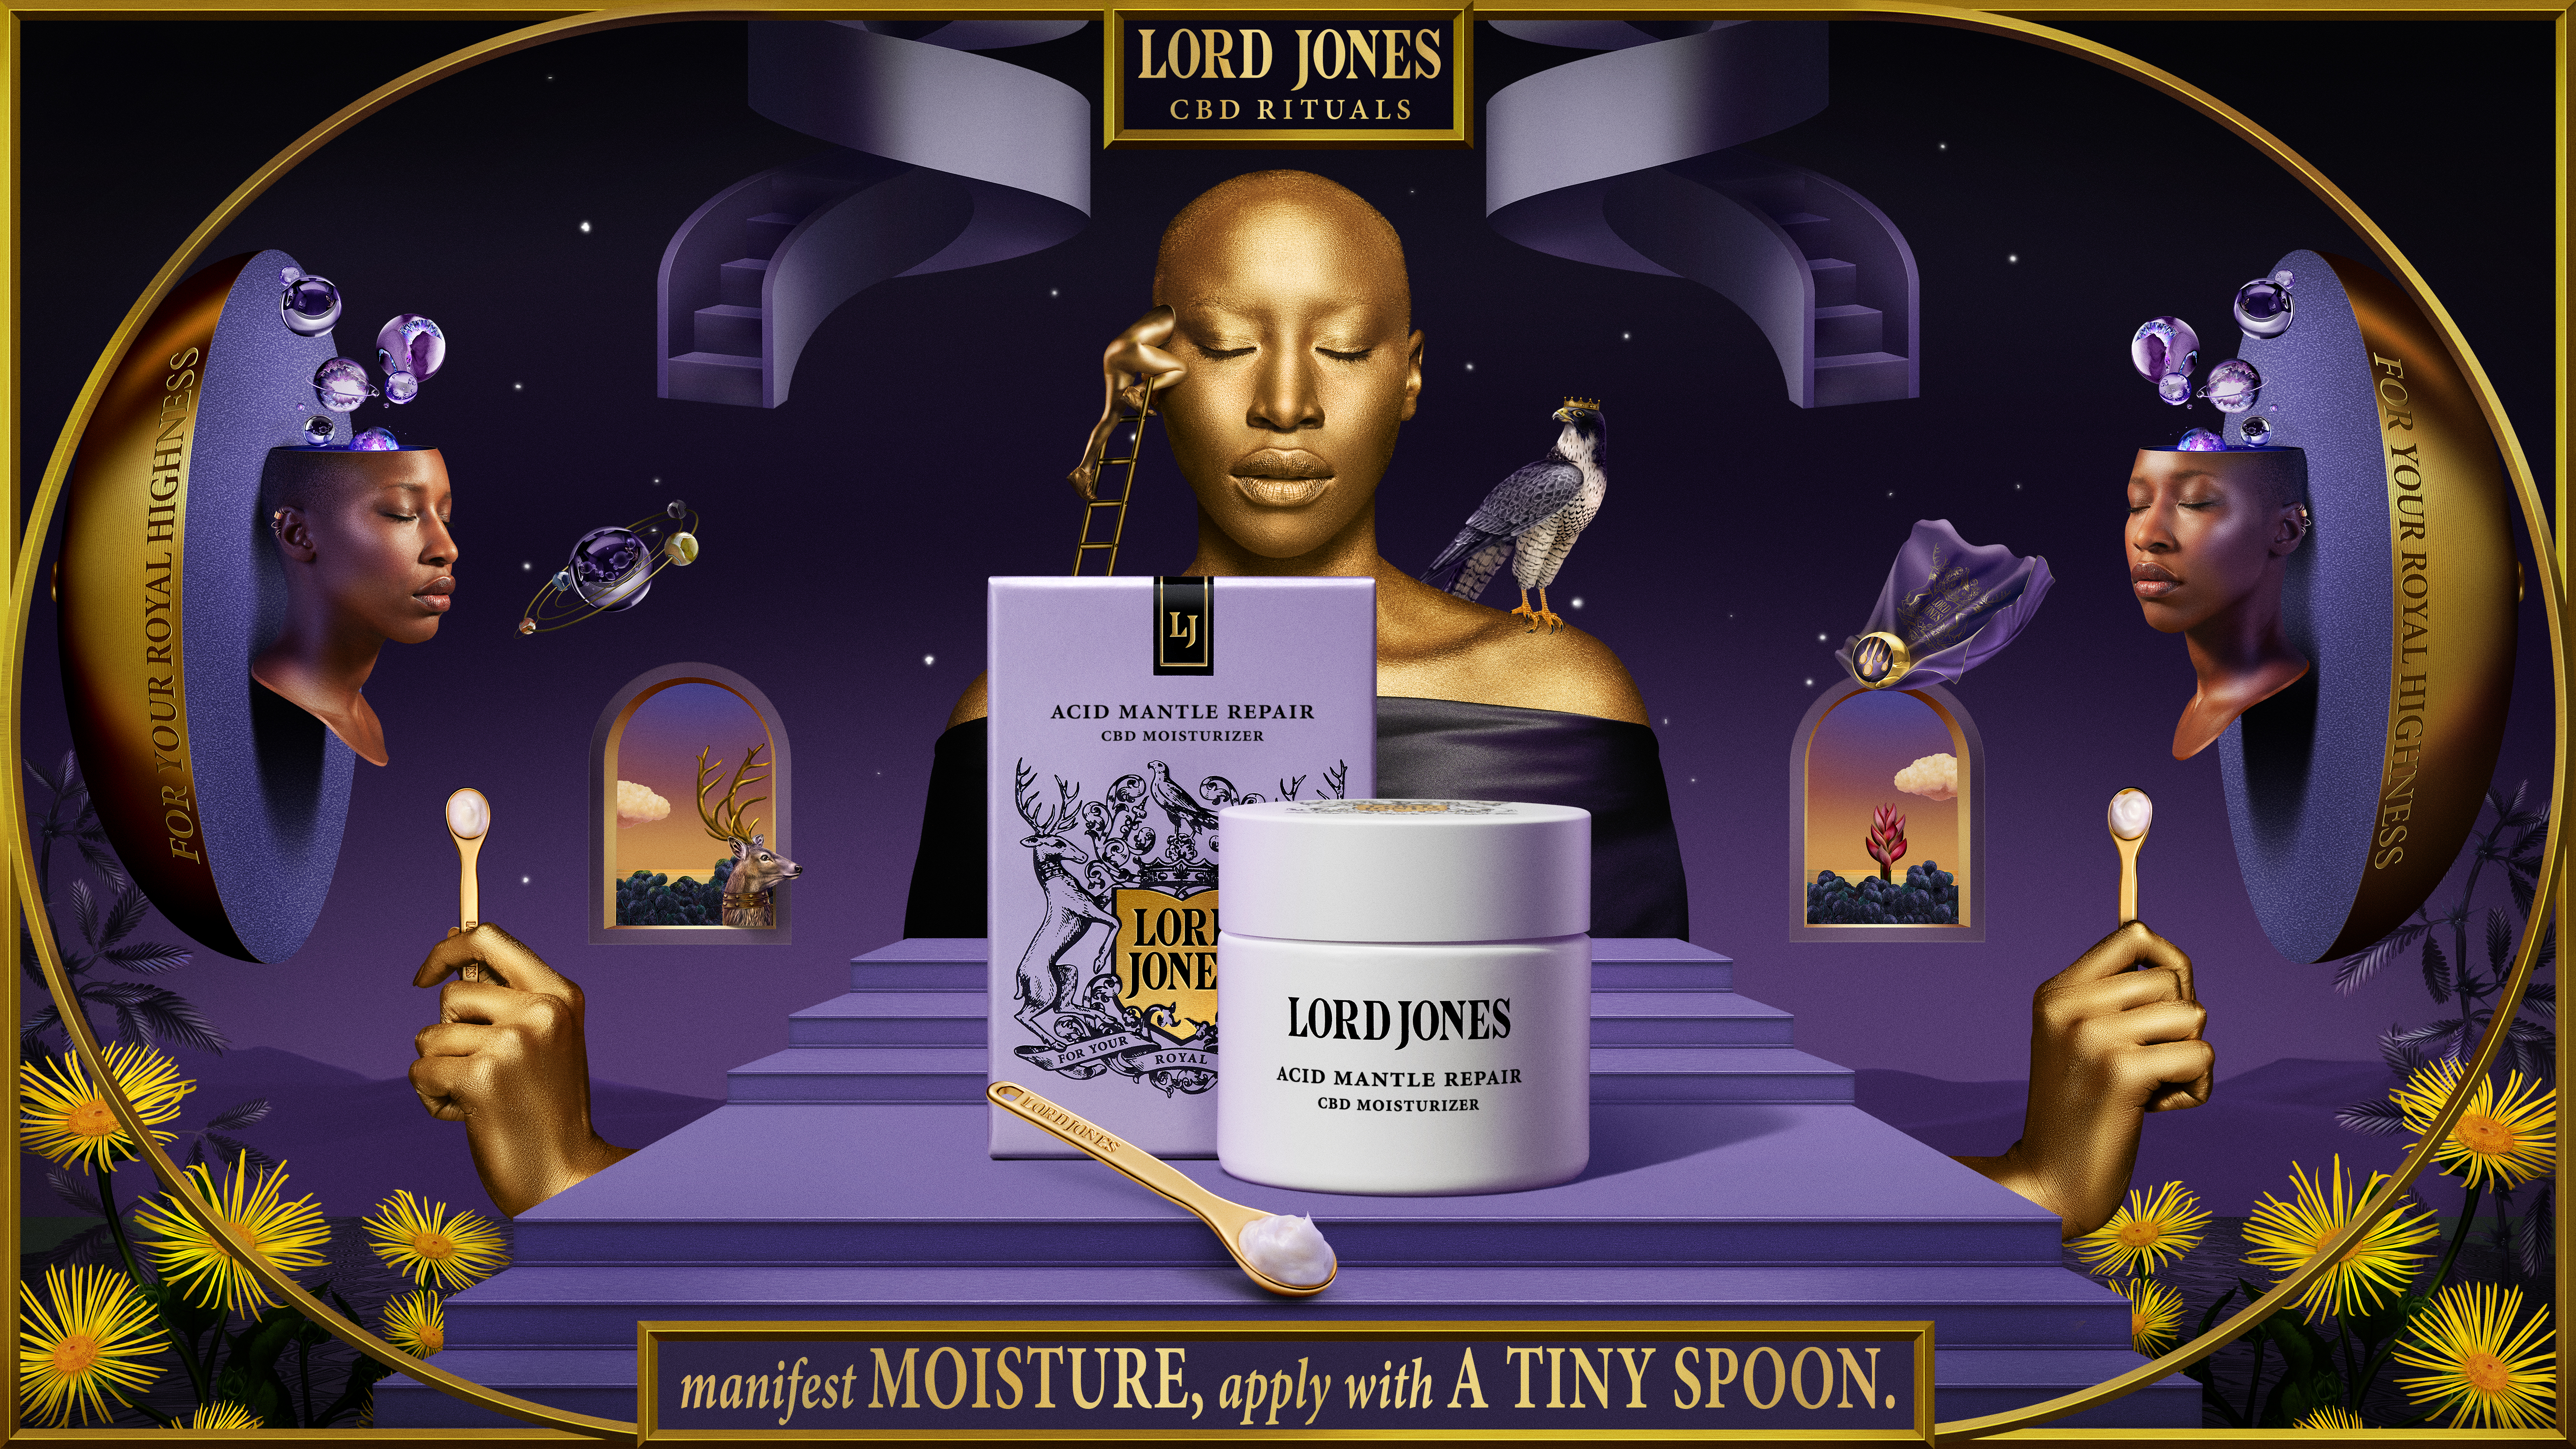 The Lord Jones campaign assets pique the imagination with dreamlike visuals and unexpected settings to illustrate the transformative nature of Lord Jones CBD rituals. 